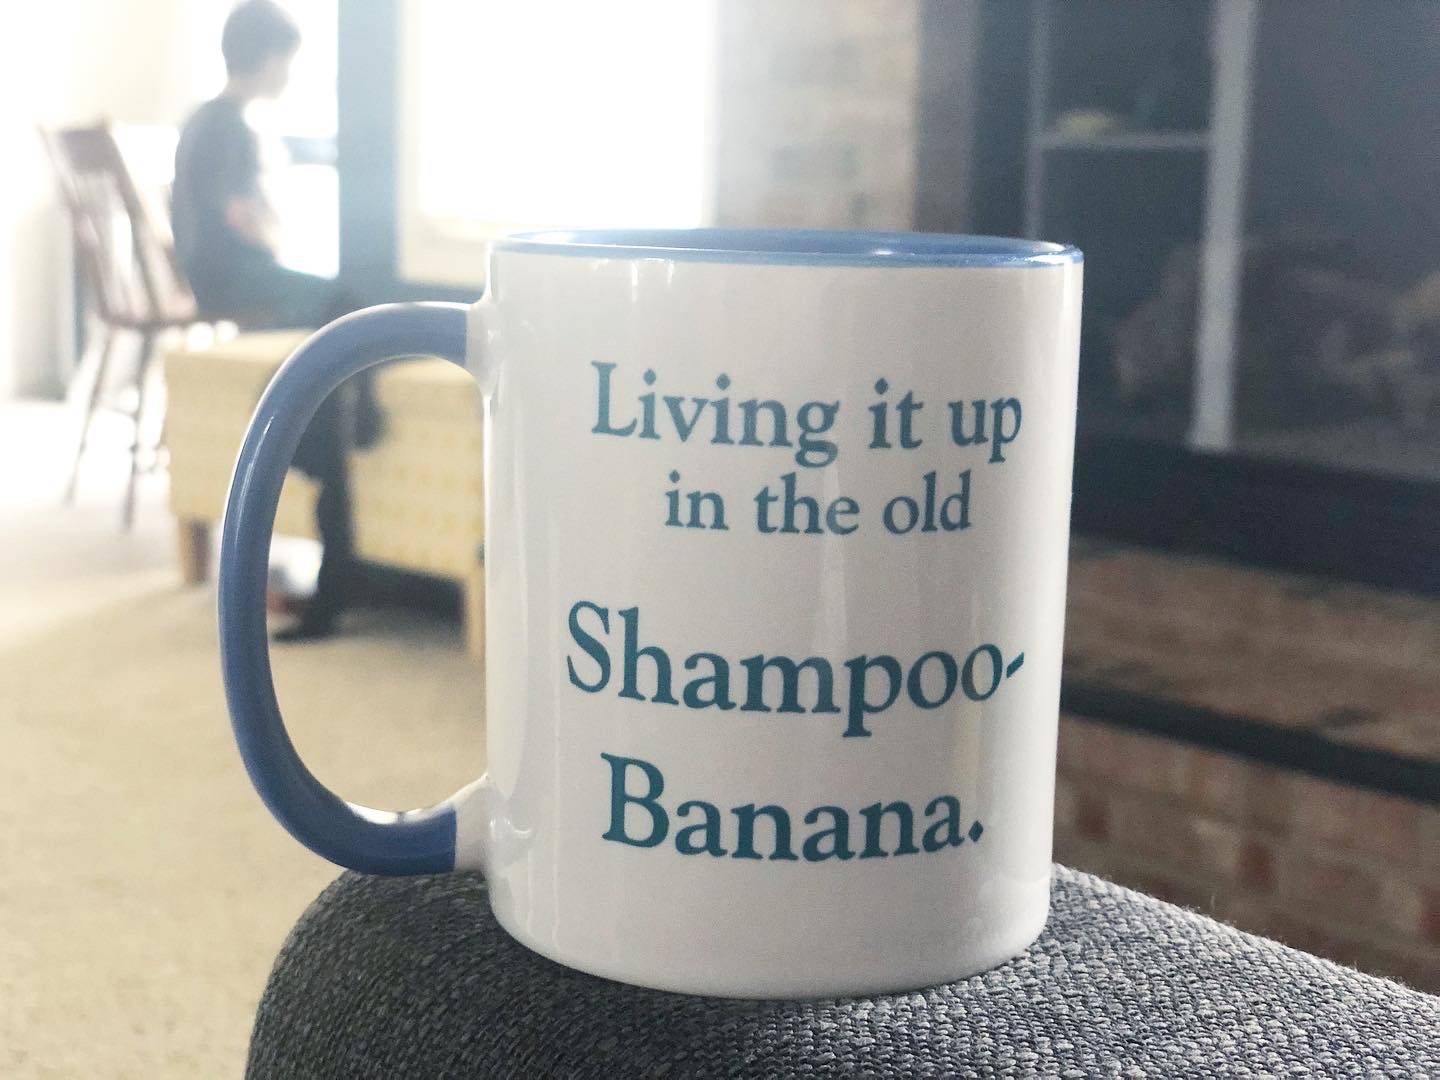 A coffee mug reading "Living it up in the old Shampoo-Banana" sits on the edge of a gray upholstered chair in the author's living room. Photo by Alyssa Buckley.